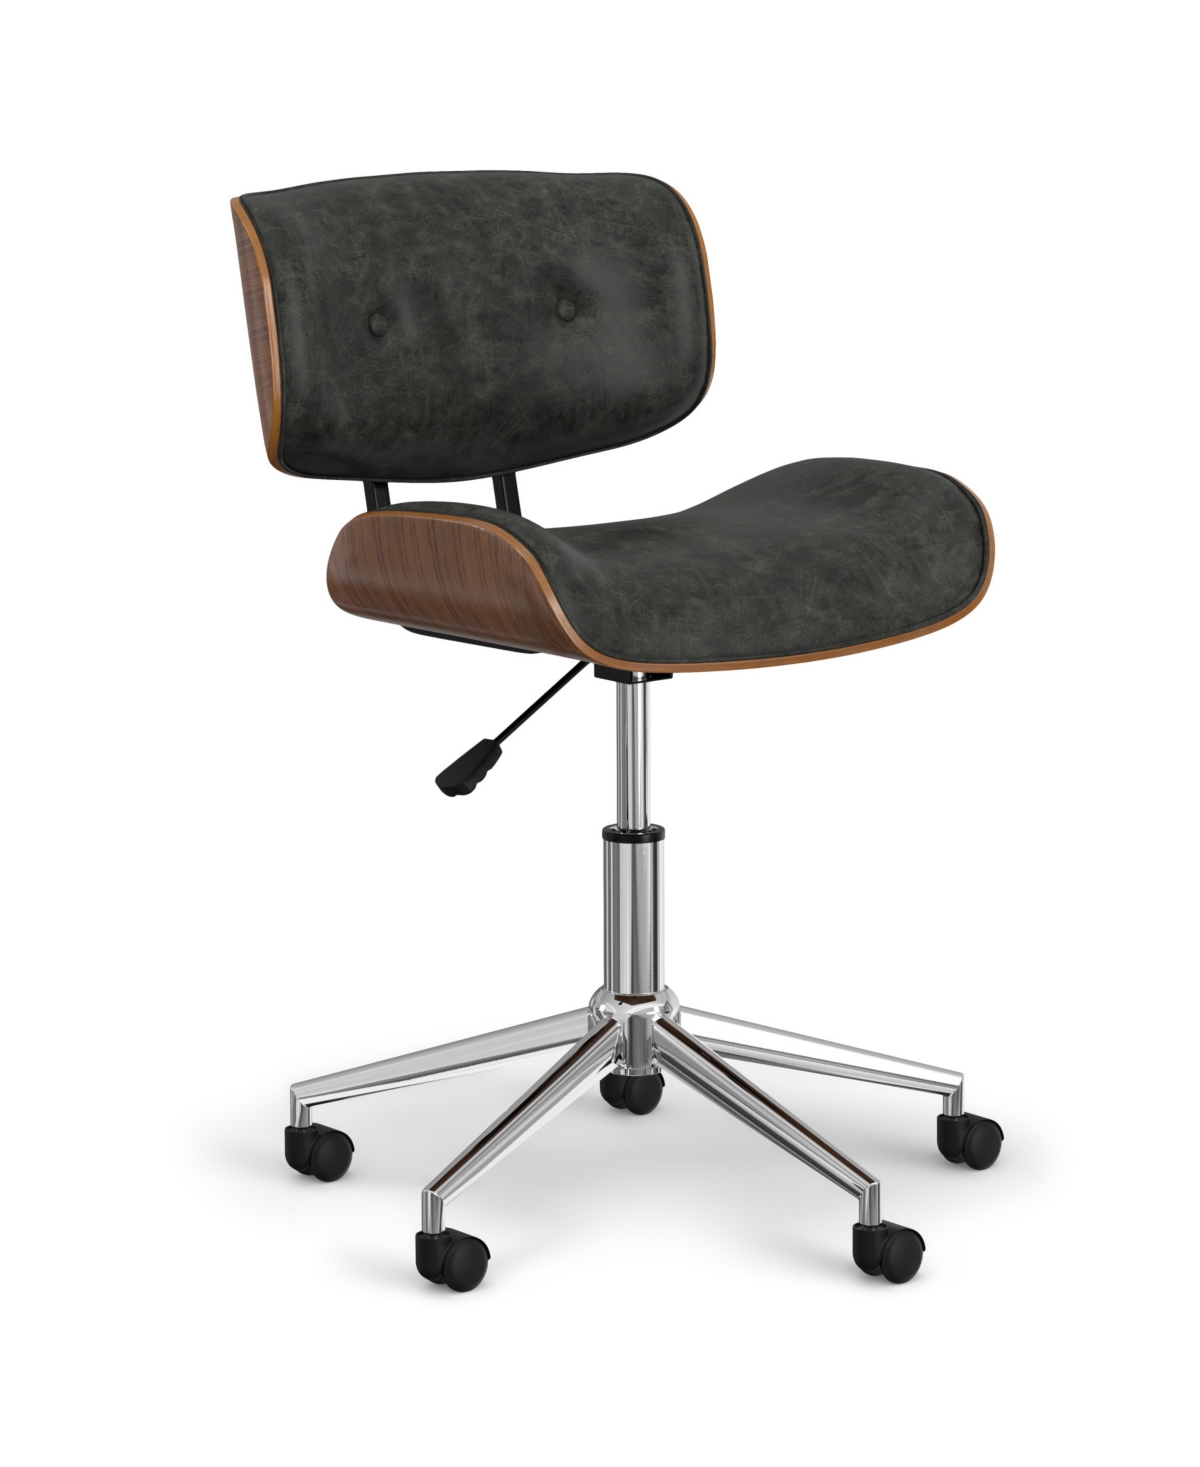 Shop Simpli Home Dax Bentwood Office Chair In Distressed Slate Grey Pu Leather